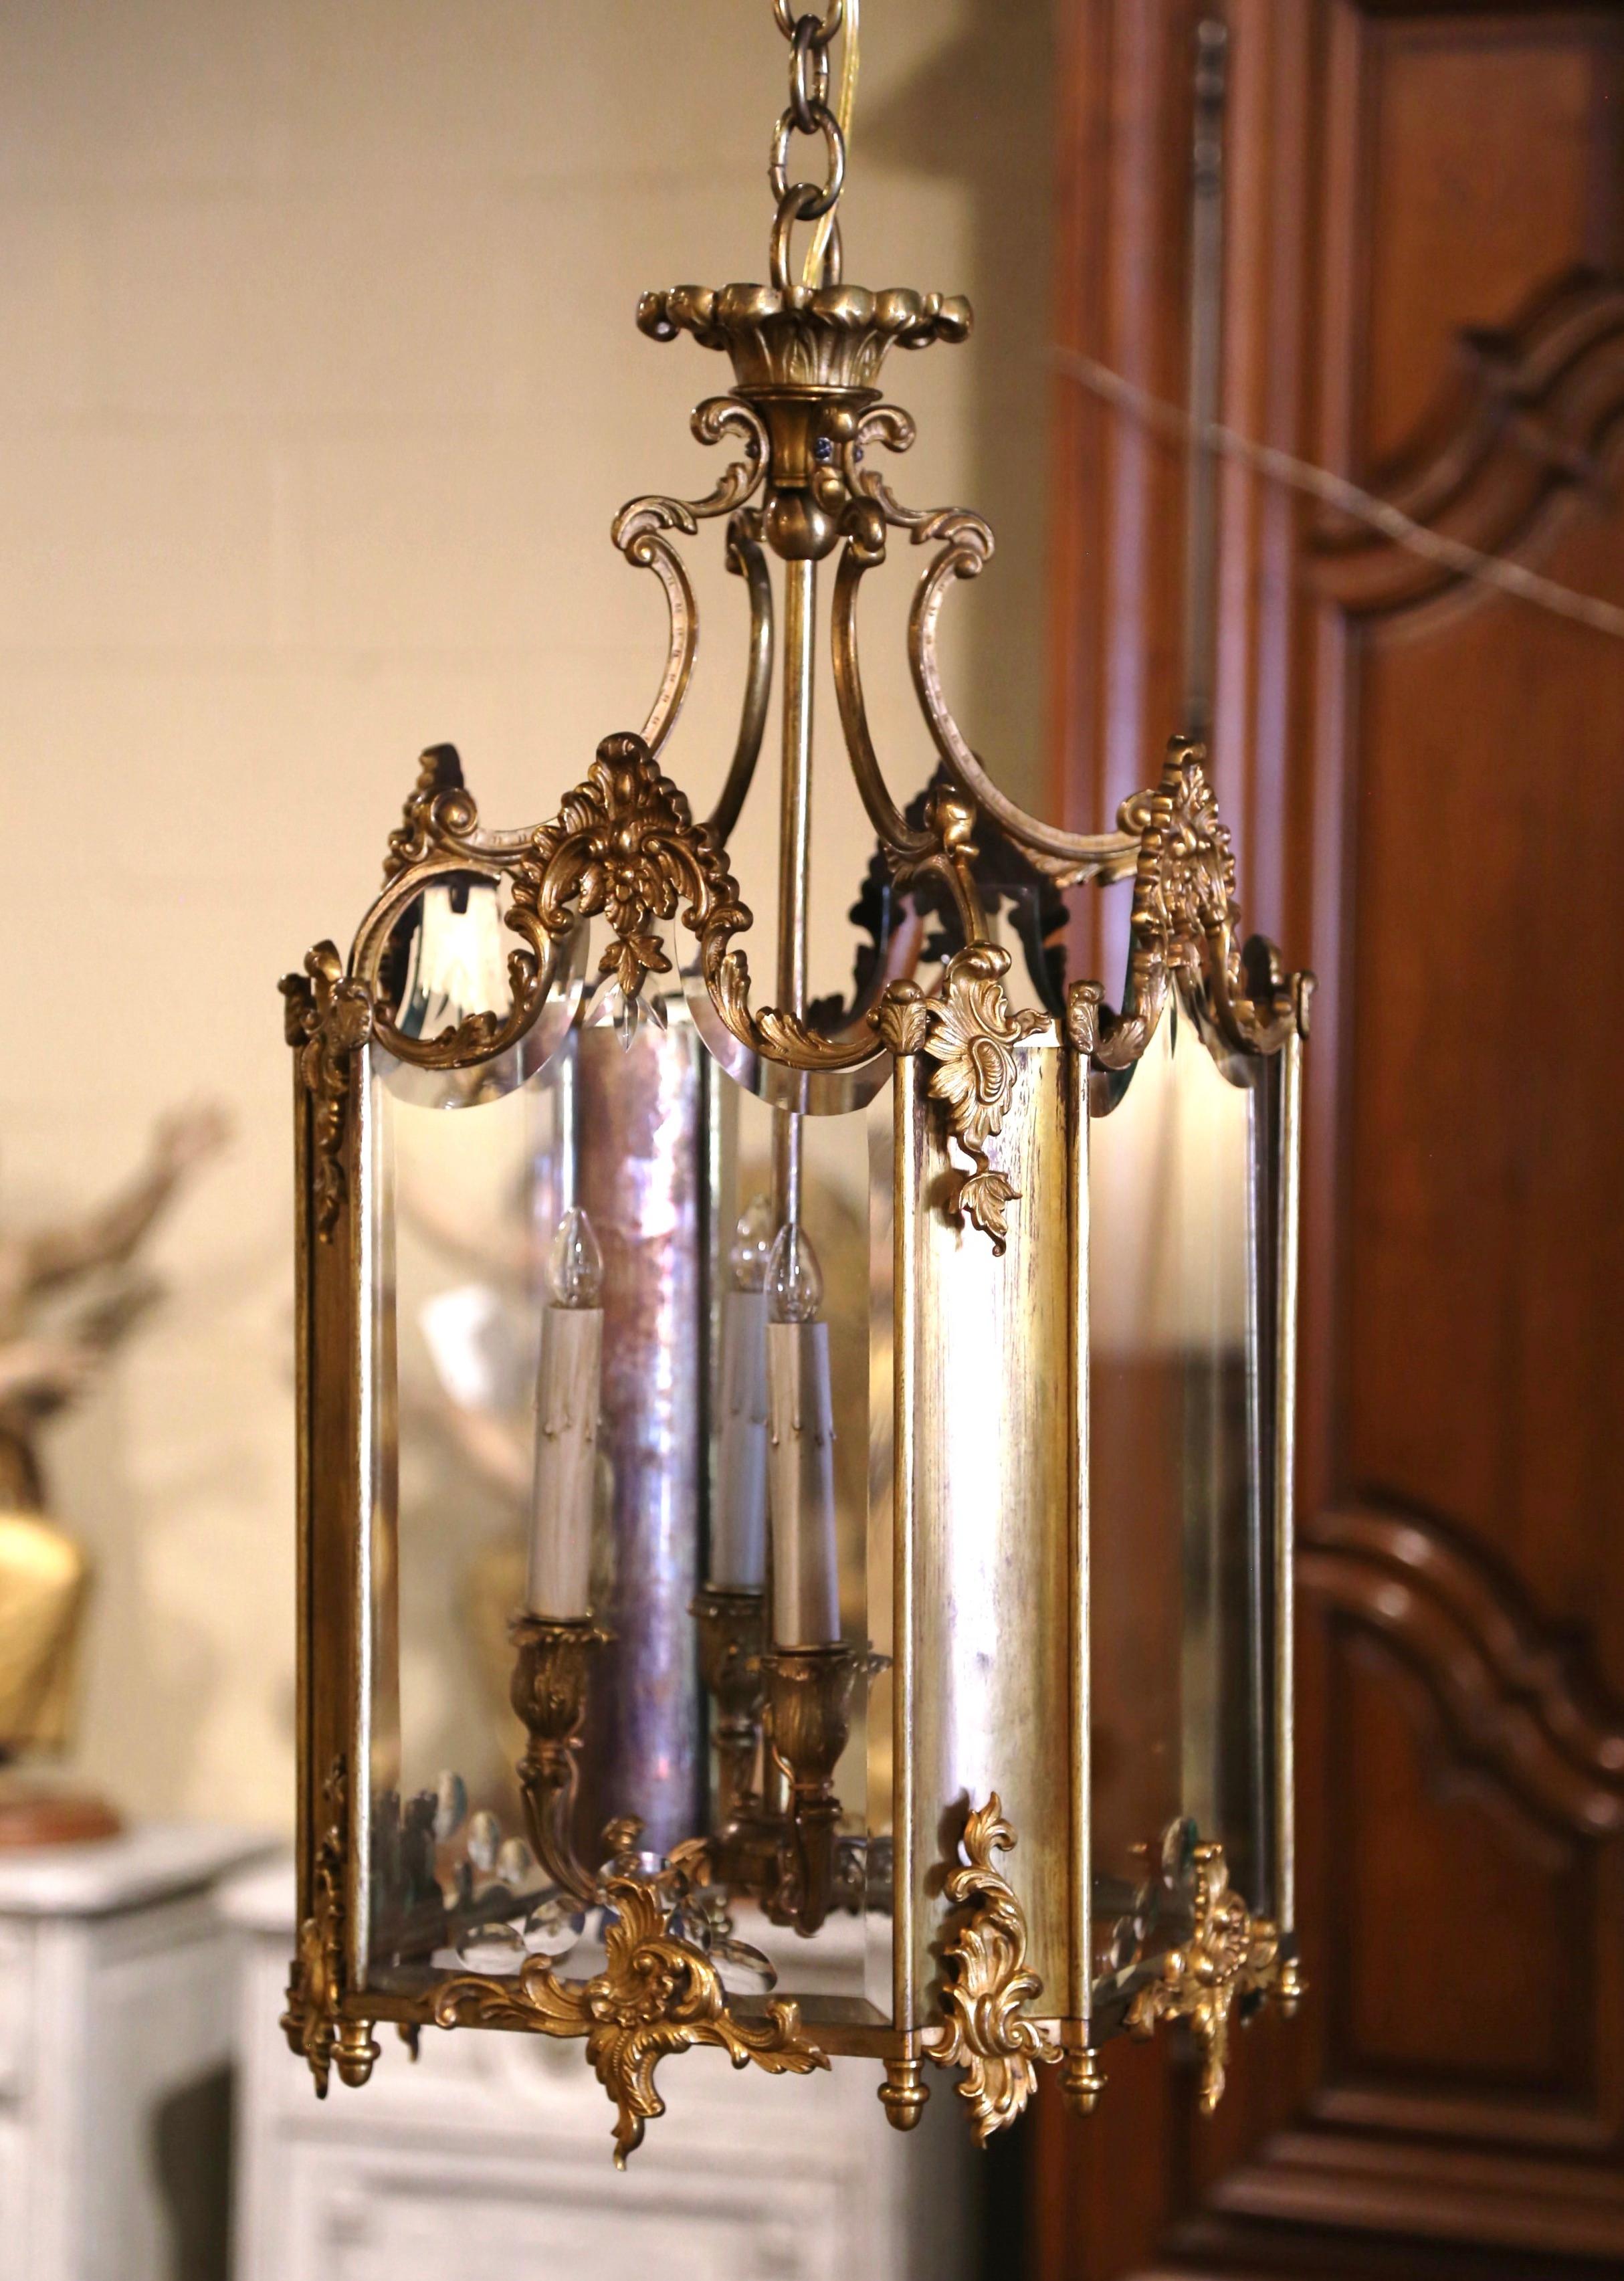 19th Century French Napoleon III Bronze Dore & Beveled Glass Four-Light Lantern In Excellent Condition For Sale In Dallas, TX